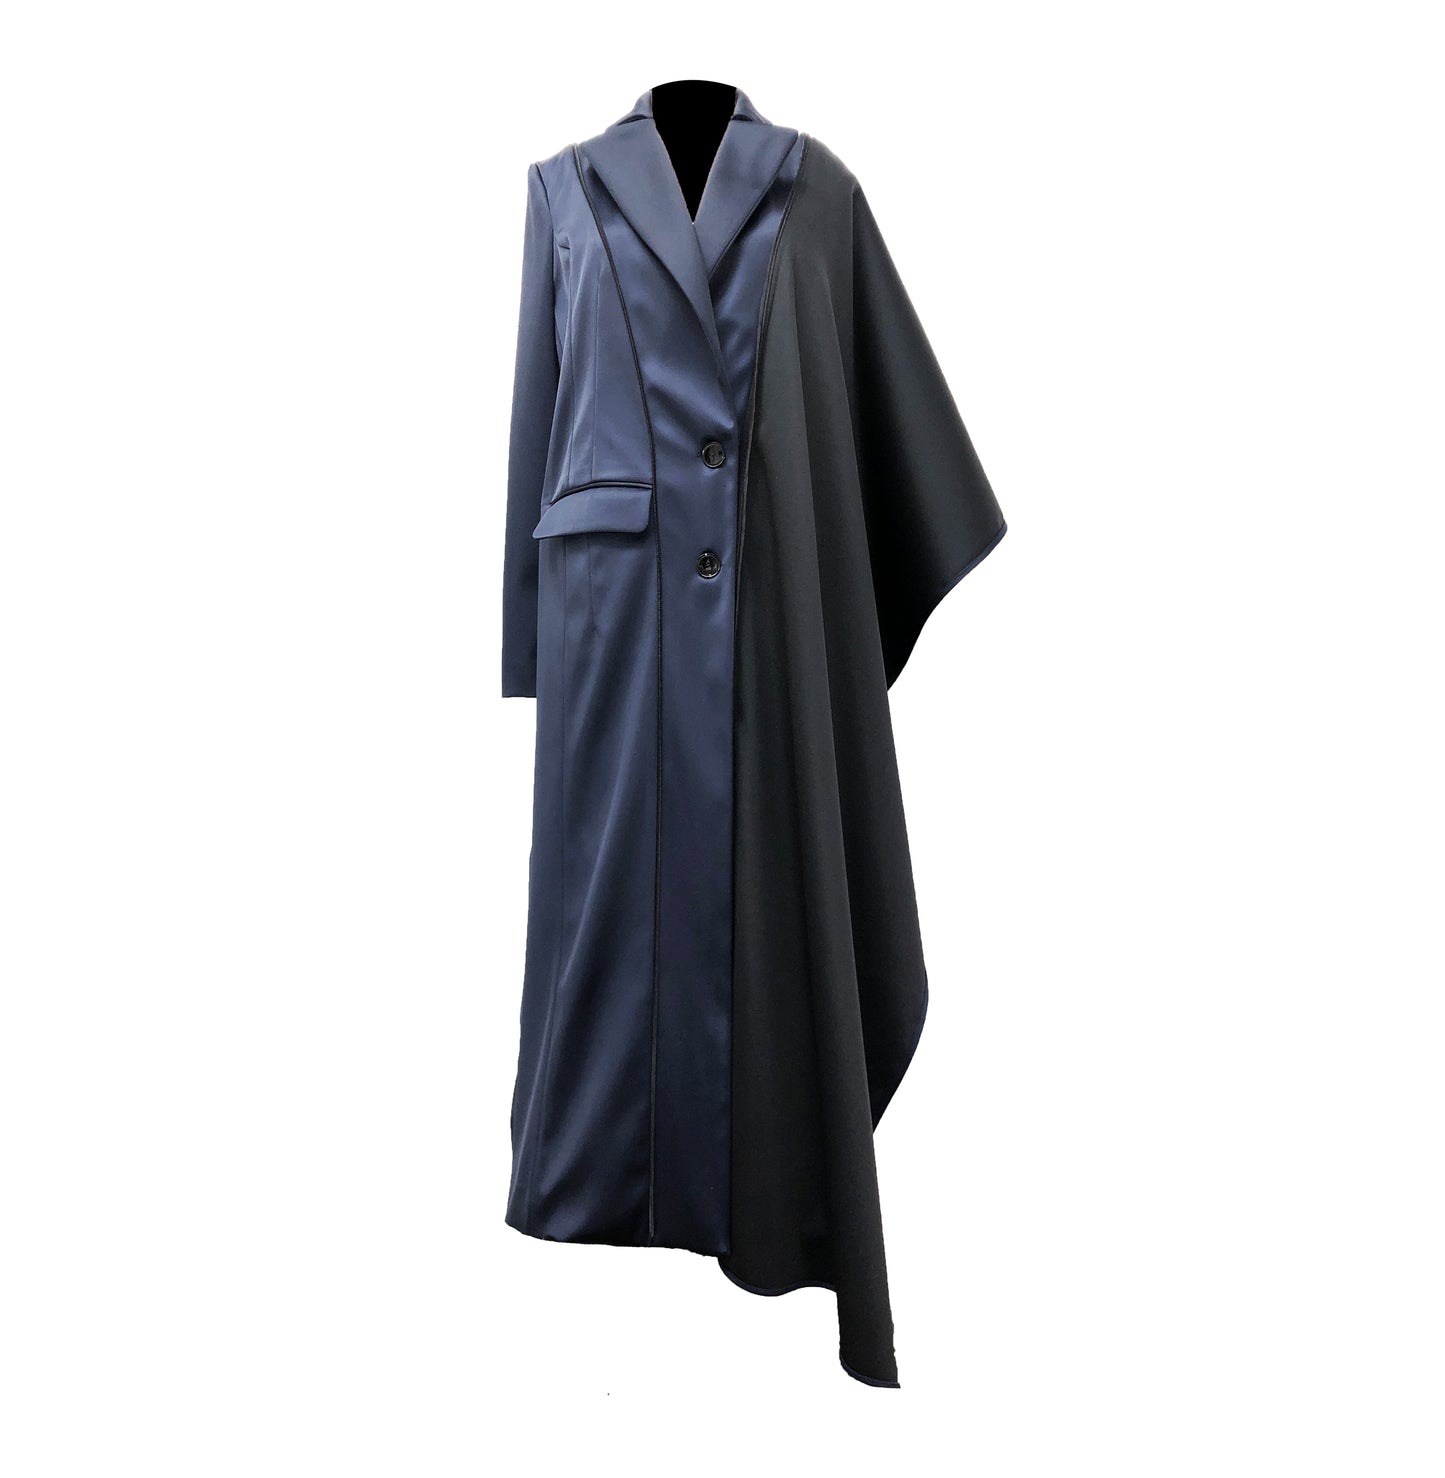 Navy stretch satin coat with transformable zippers and self tie belt with side draped detail